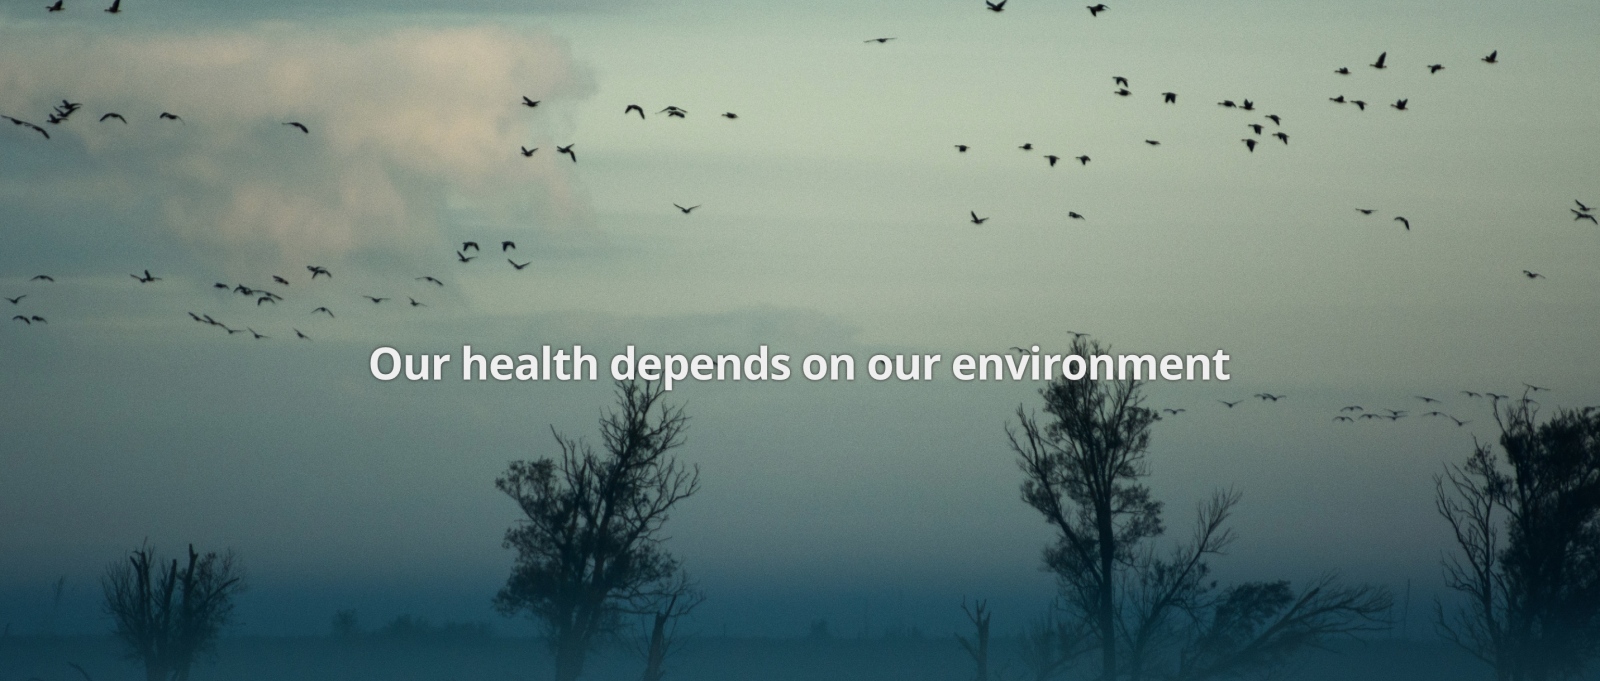 Announcing the new Planetary Health Alliance website